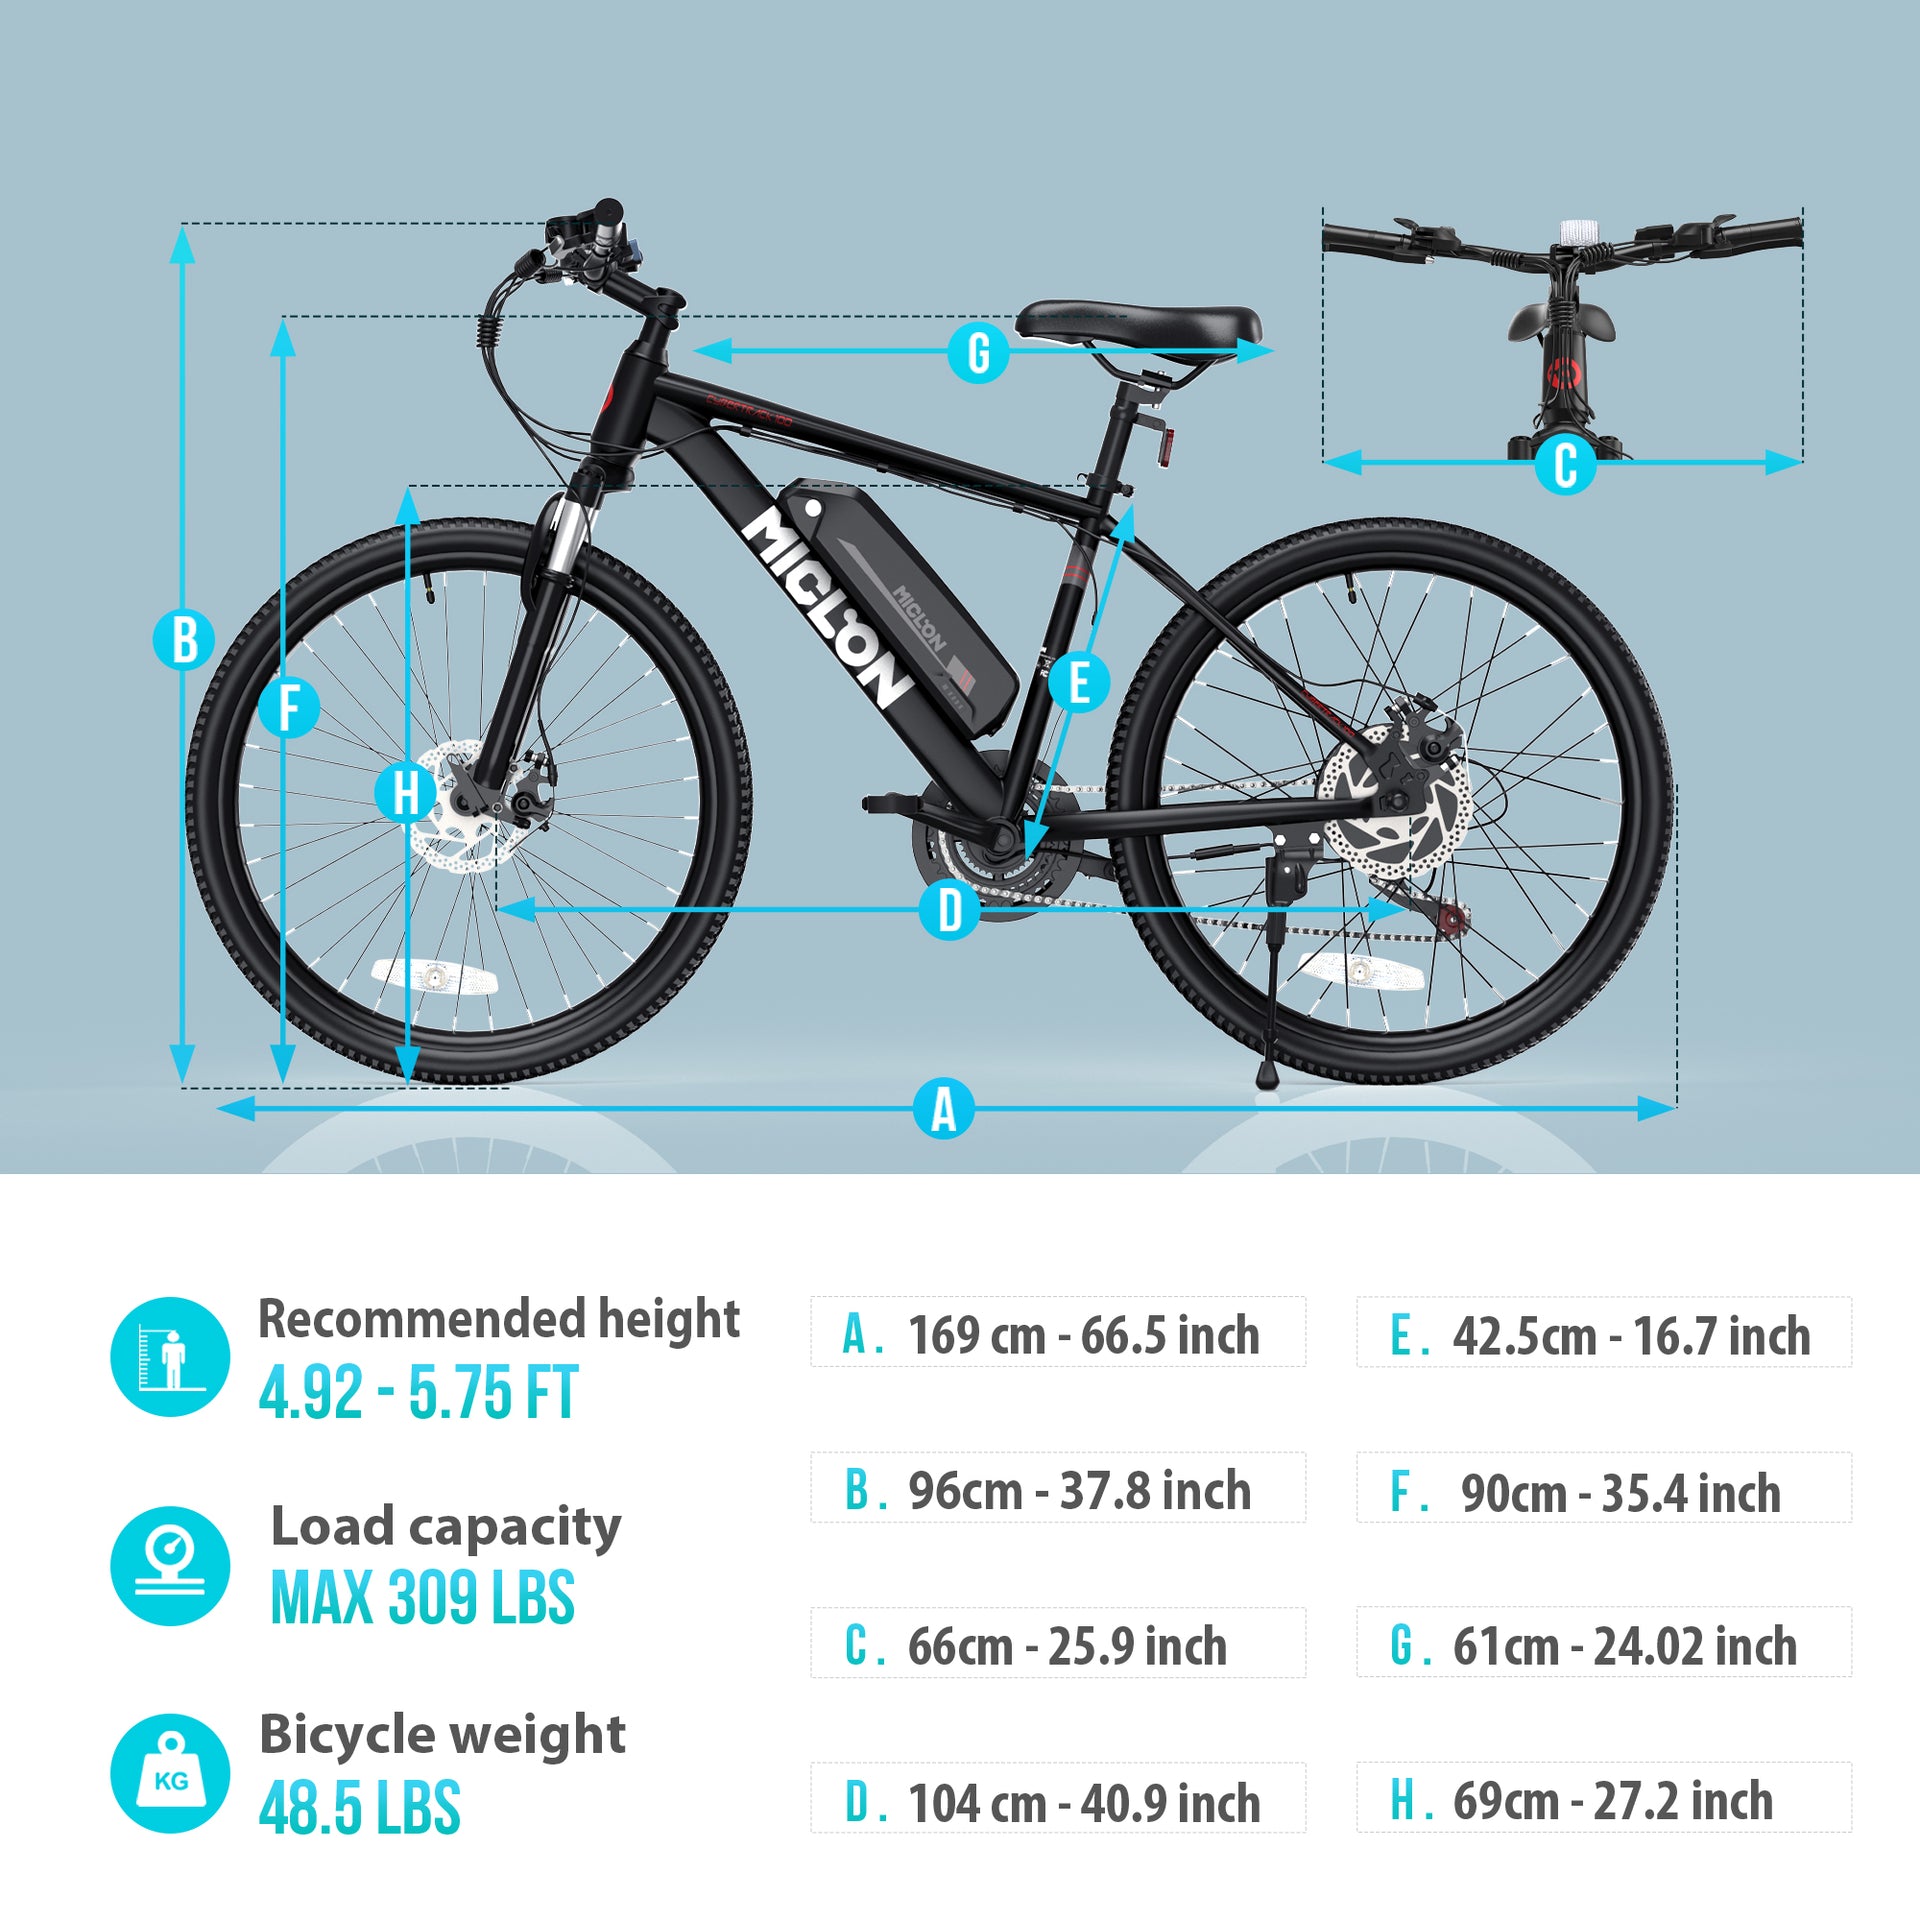 MICLON 26" Electric Mountain Bike for Adults (Black), 3H Fast Charge, 350W BAFANG Motor, Cybertrack 100